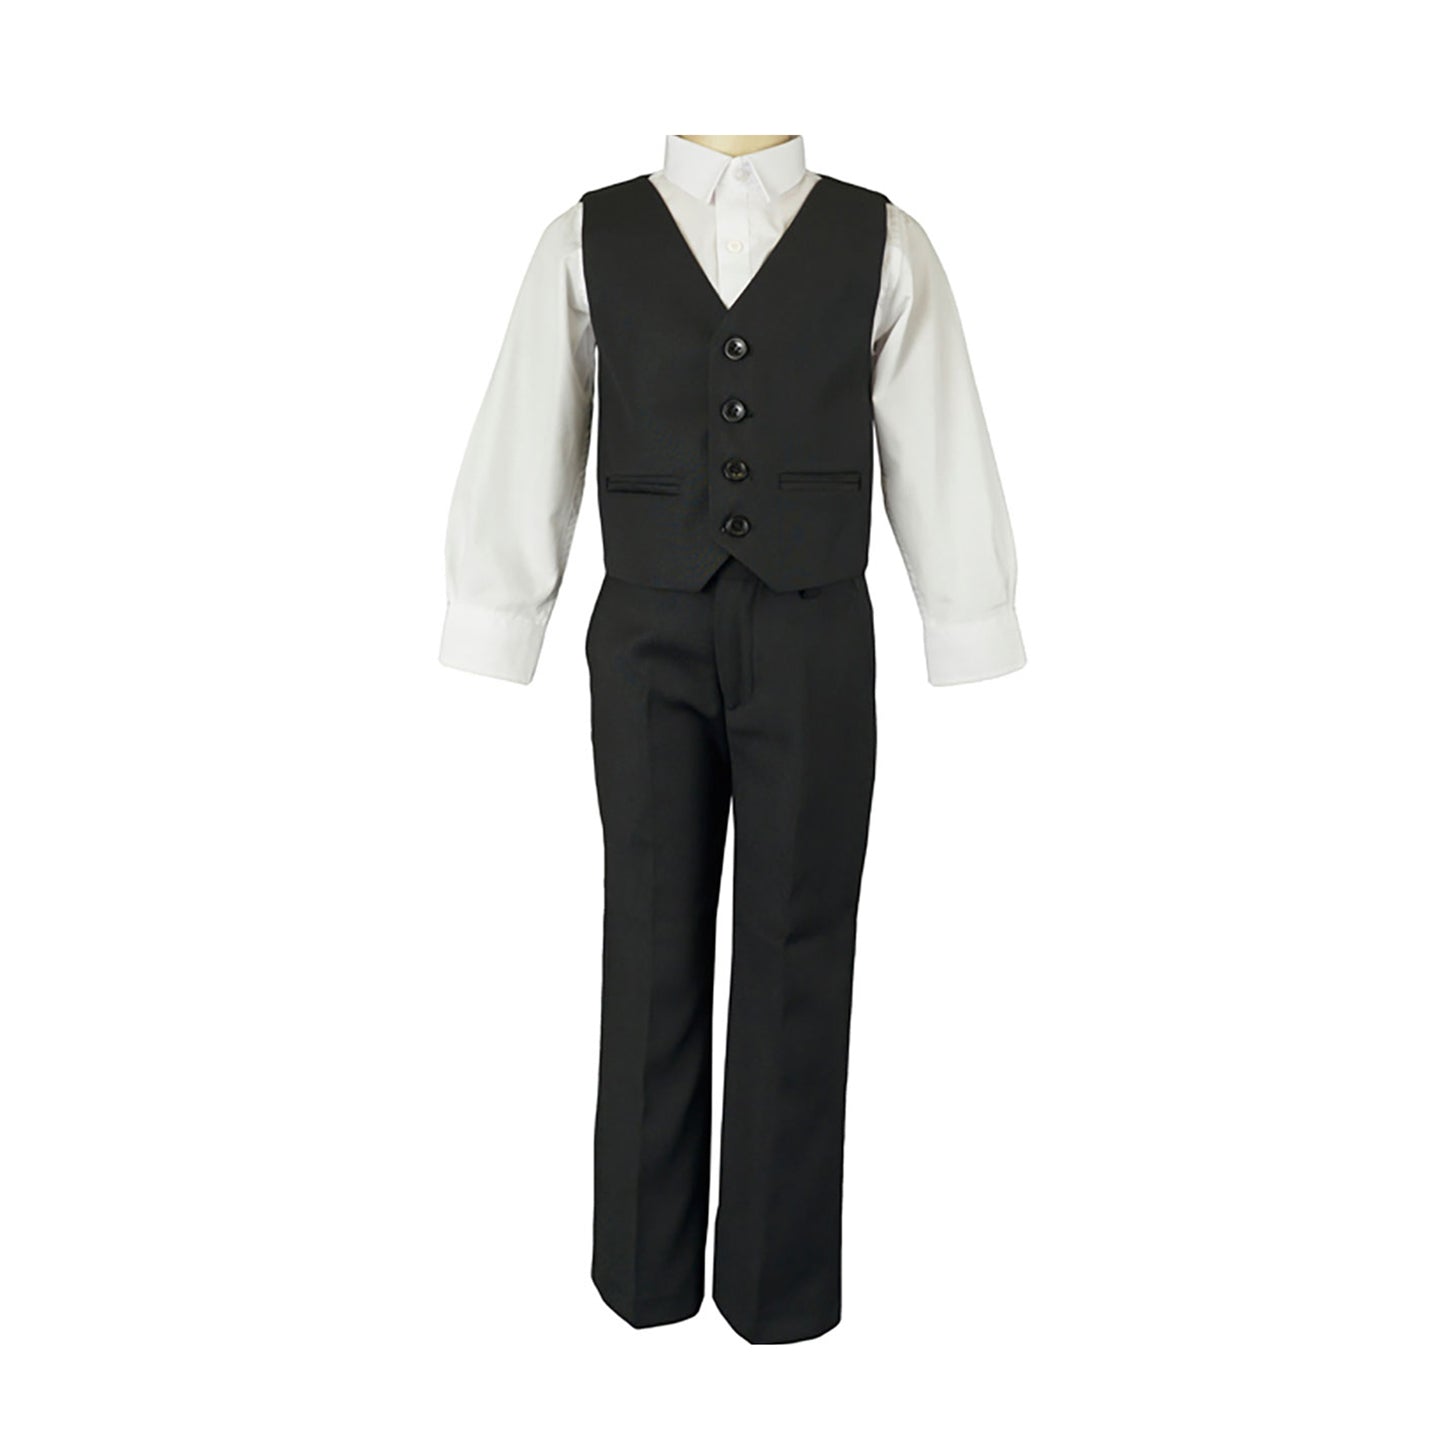 Boys' Formal Black Suit, 3 Piece Set (size 8 years to 16 years)